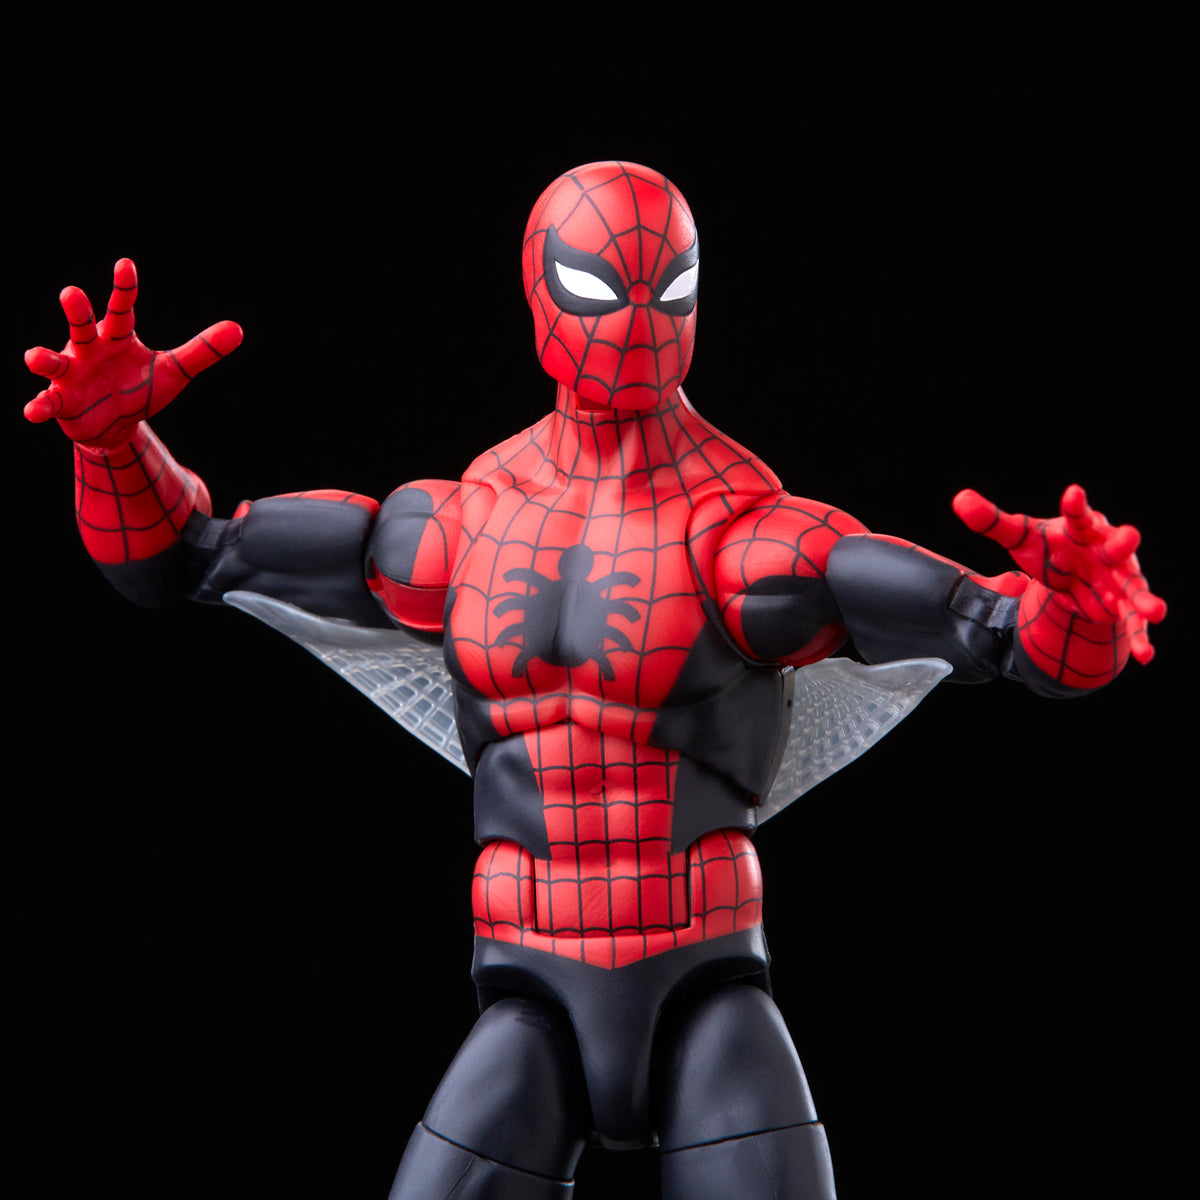 After spending some time with the Amazing Fantasy Spider-Man figure, I'm so  hyped for that upcoming Amazing Friends Spider-Man! It's probably going to  be the best Marvel Legend Spider-Man ever made! 